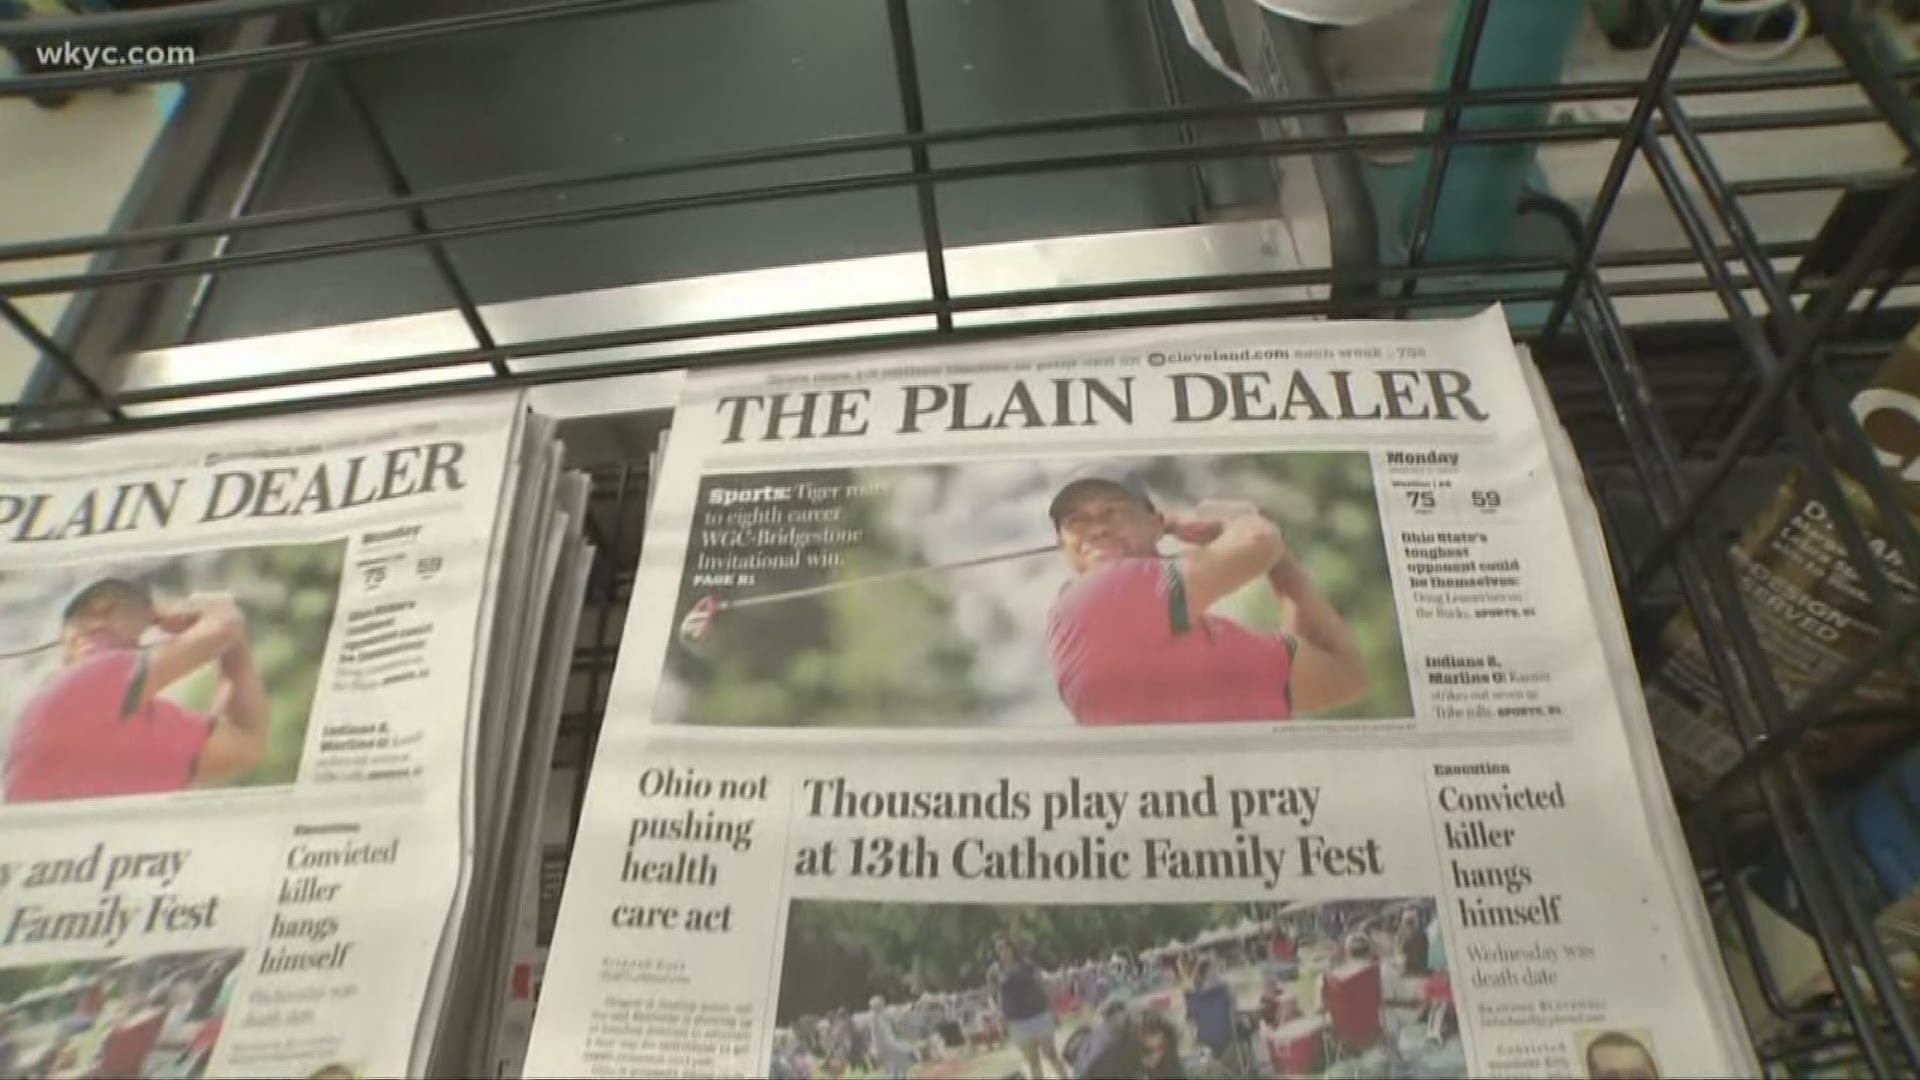 Ohio's largest daily newspaper drastically cut staffing on Friday. The Plain Dealer announced it had laid off 22 people.